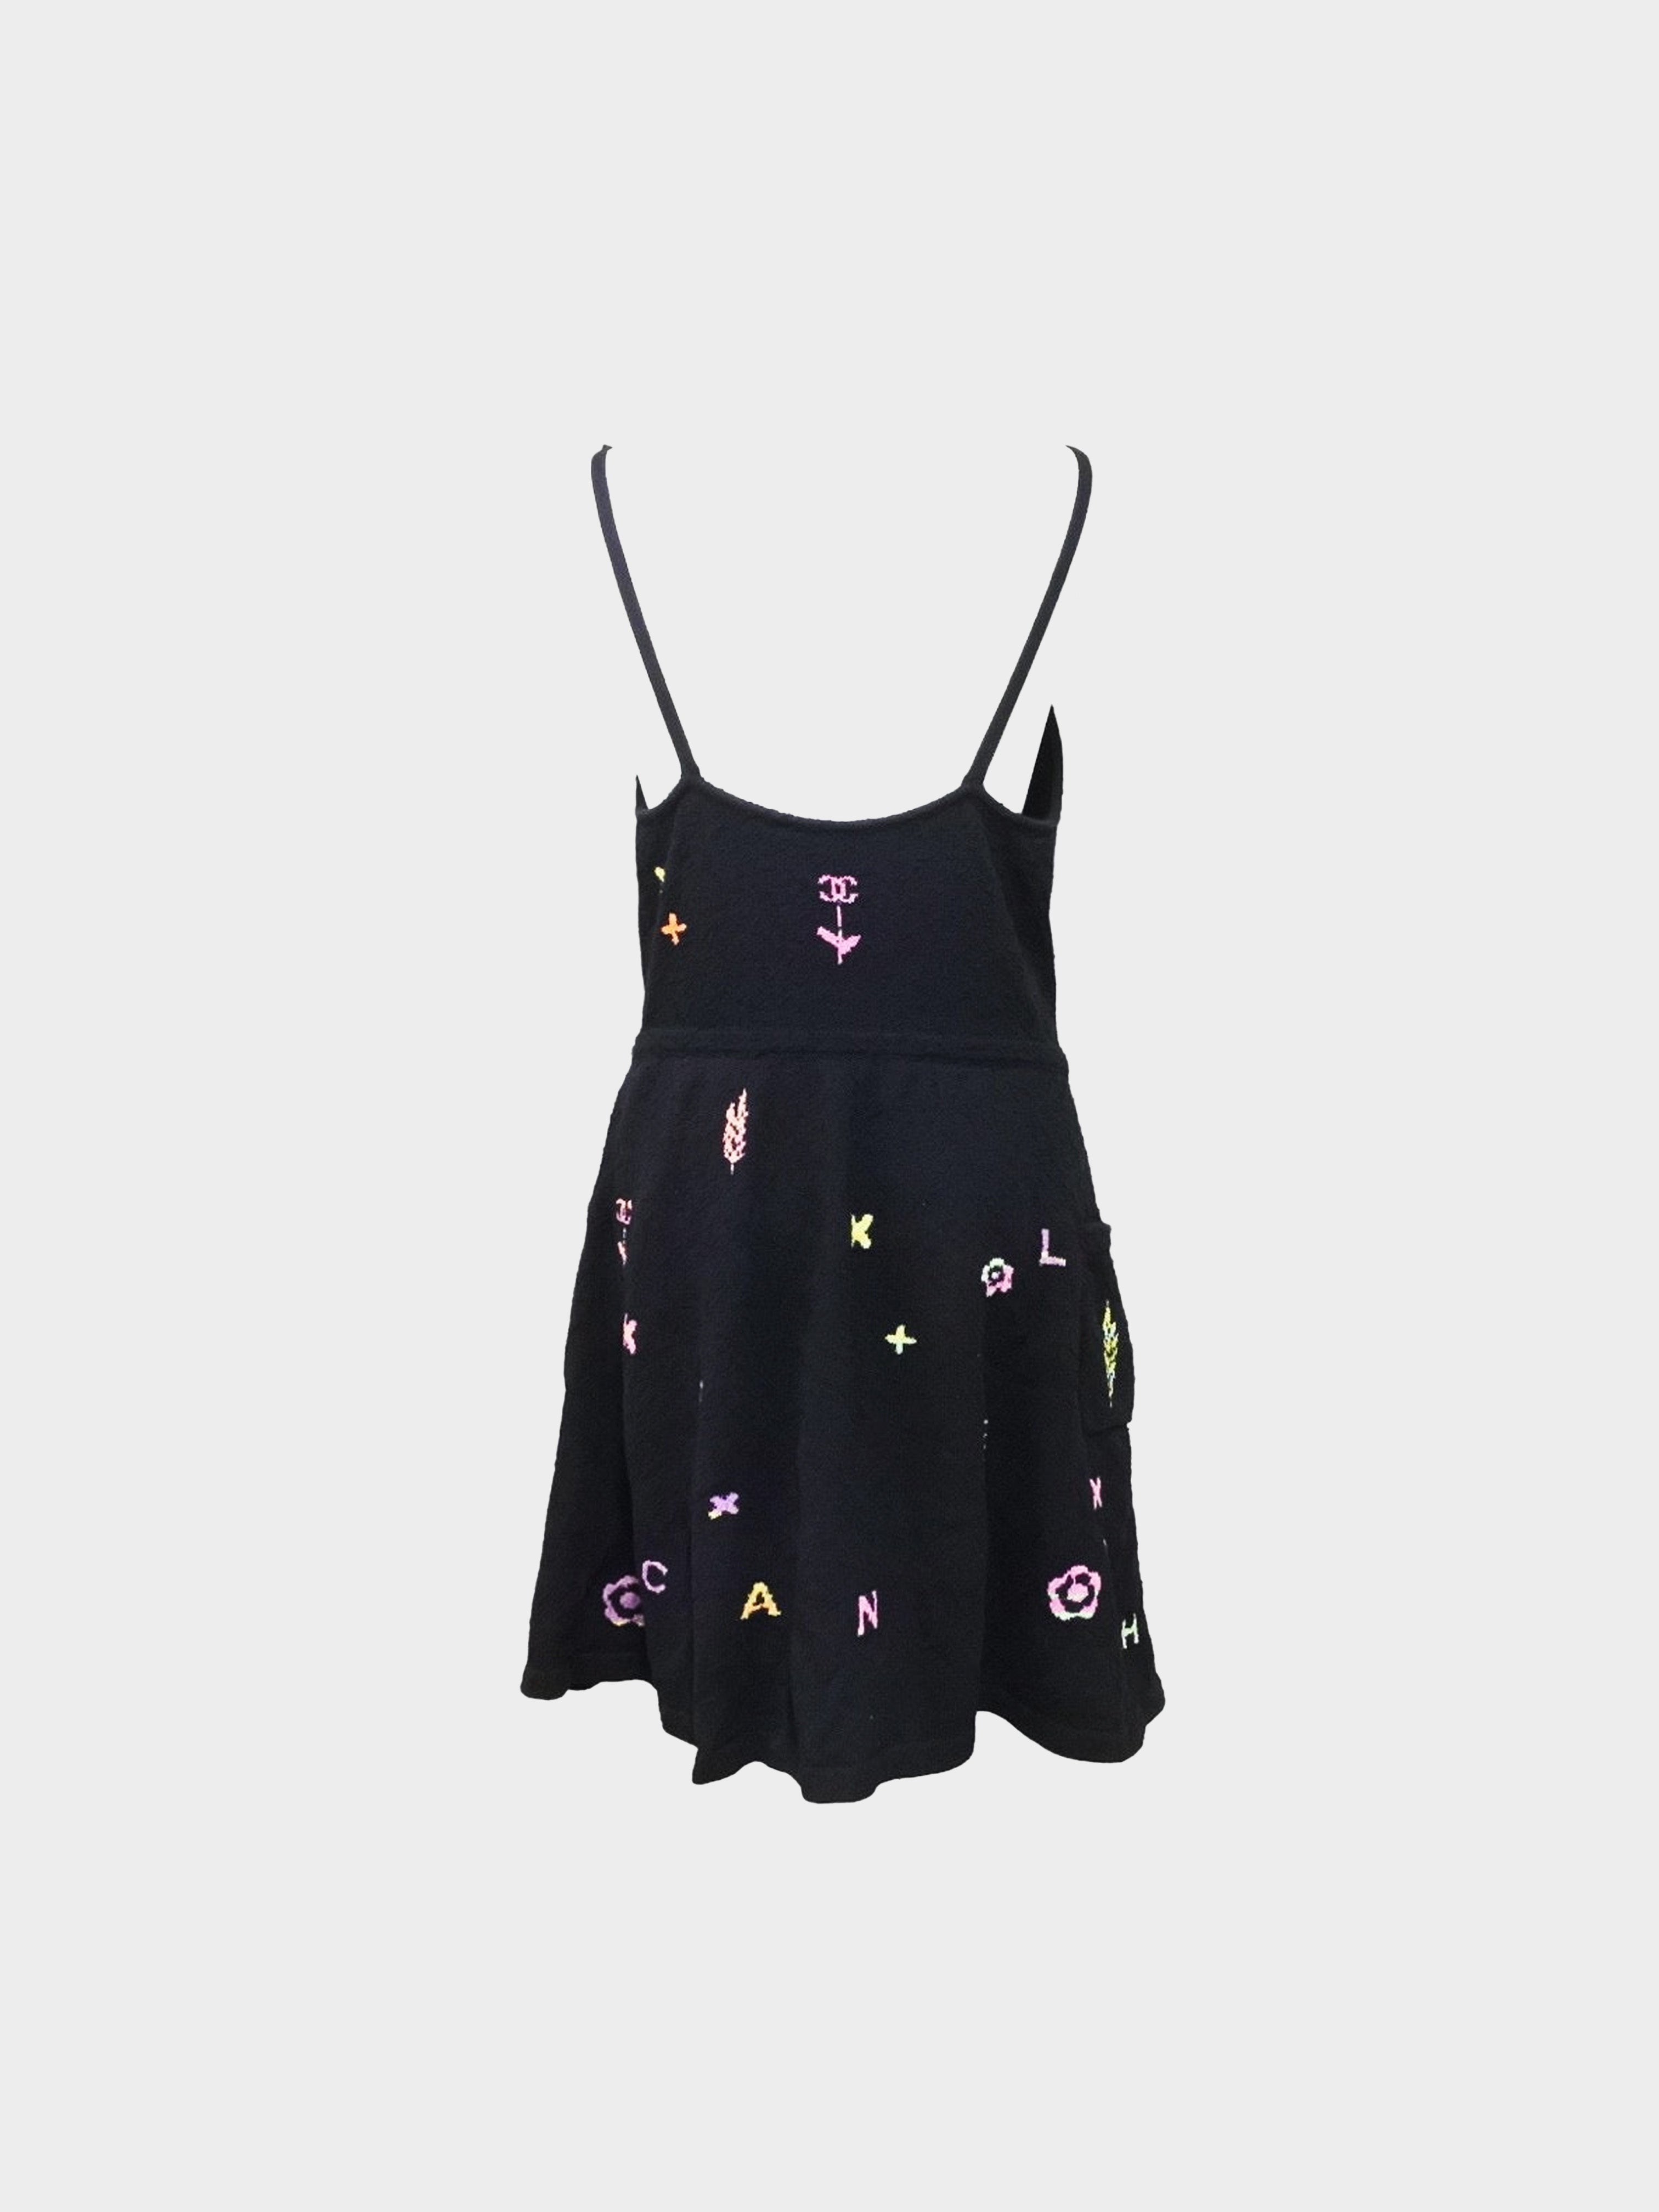 Chanel SS22 Terrycloth Floral Logo Romper